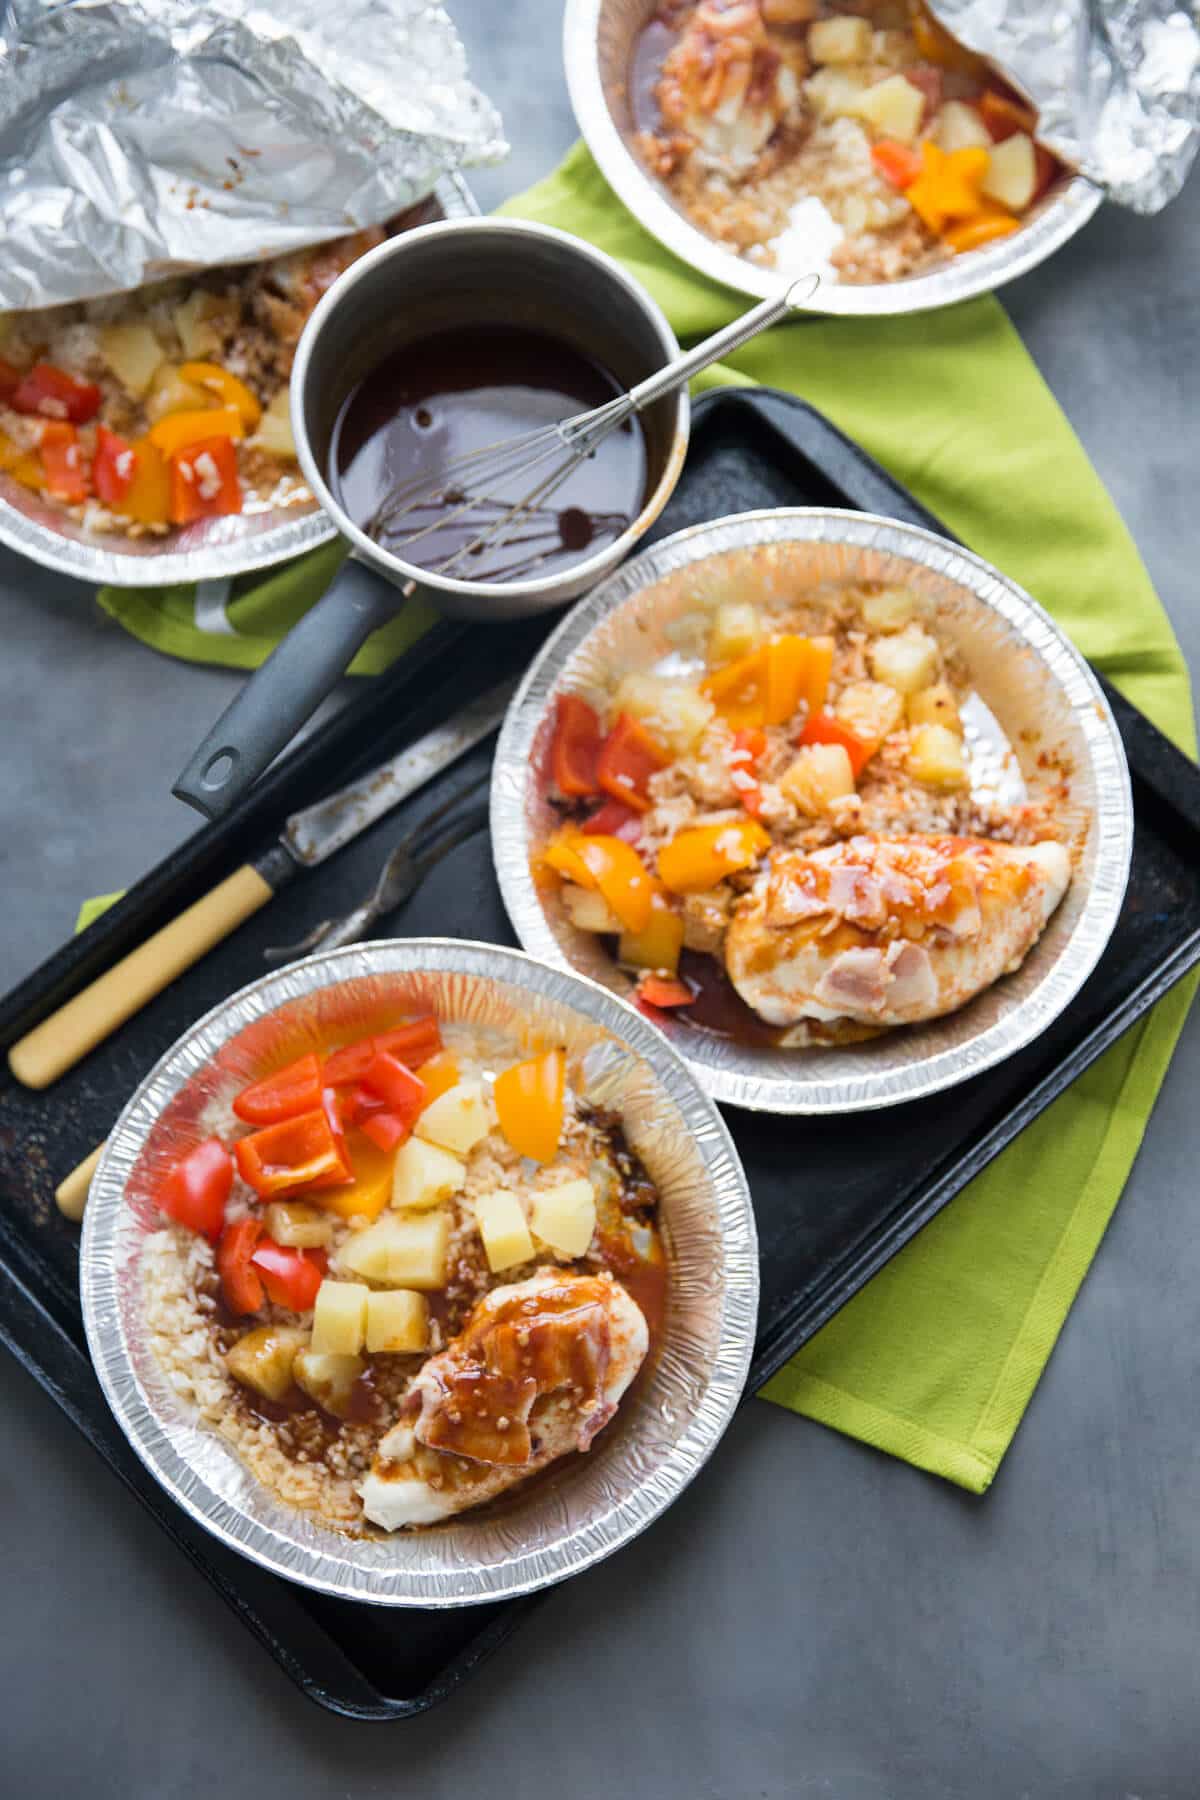 This pineapple chicken is a one pot meal that is cooked right on the grill! So easy and so good!